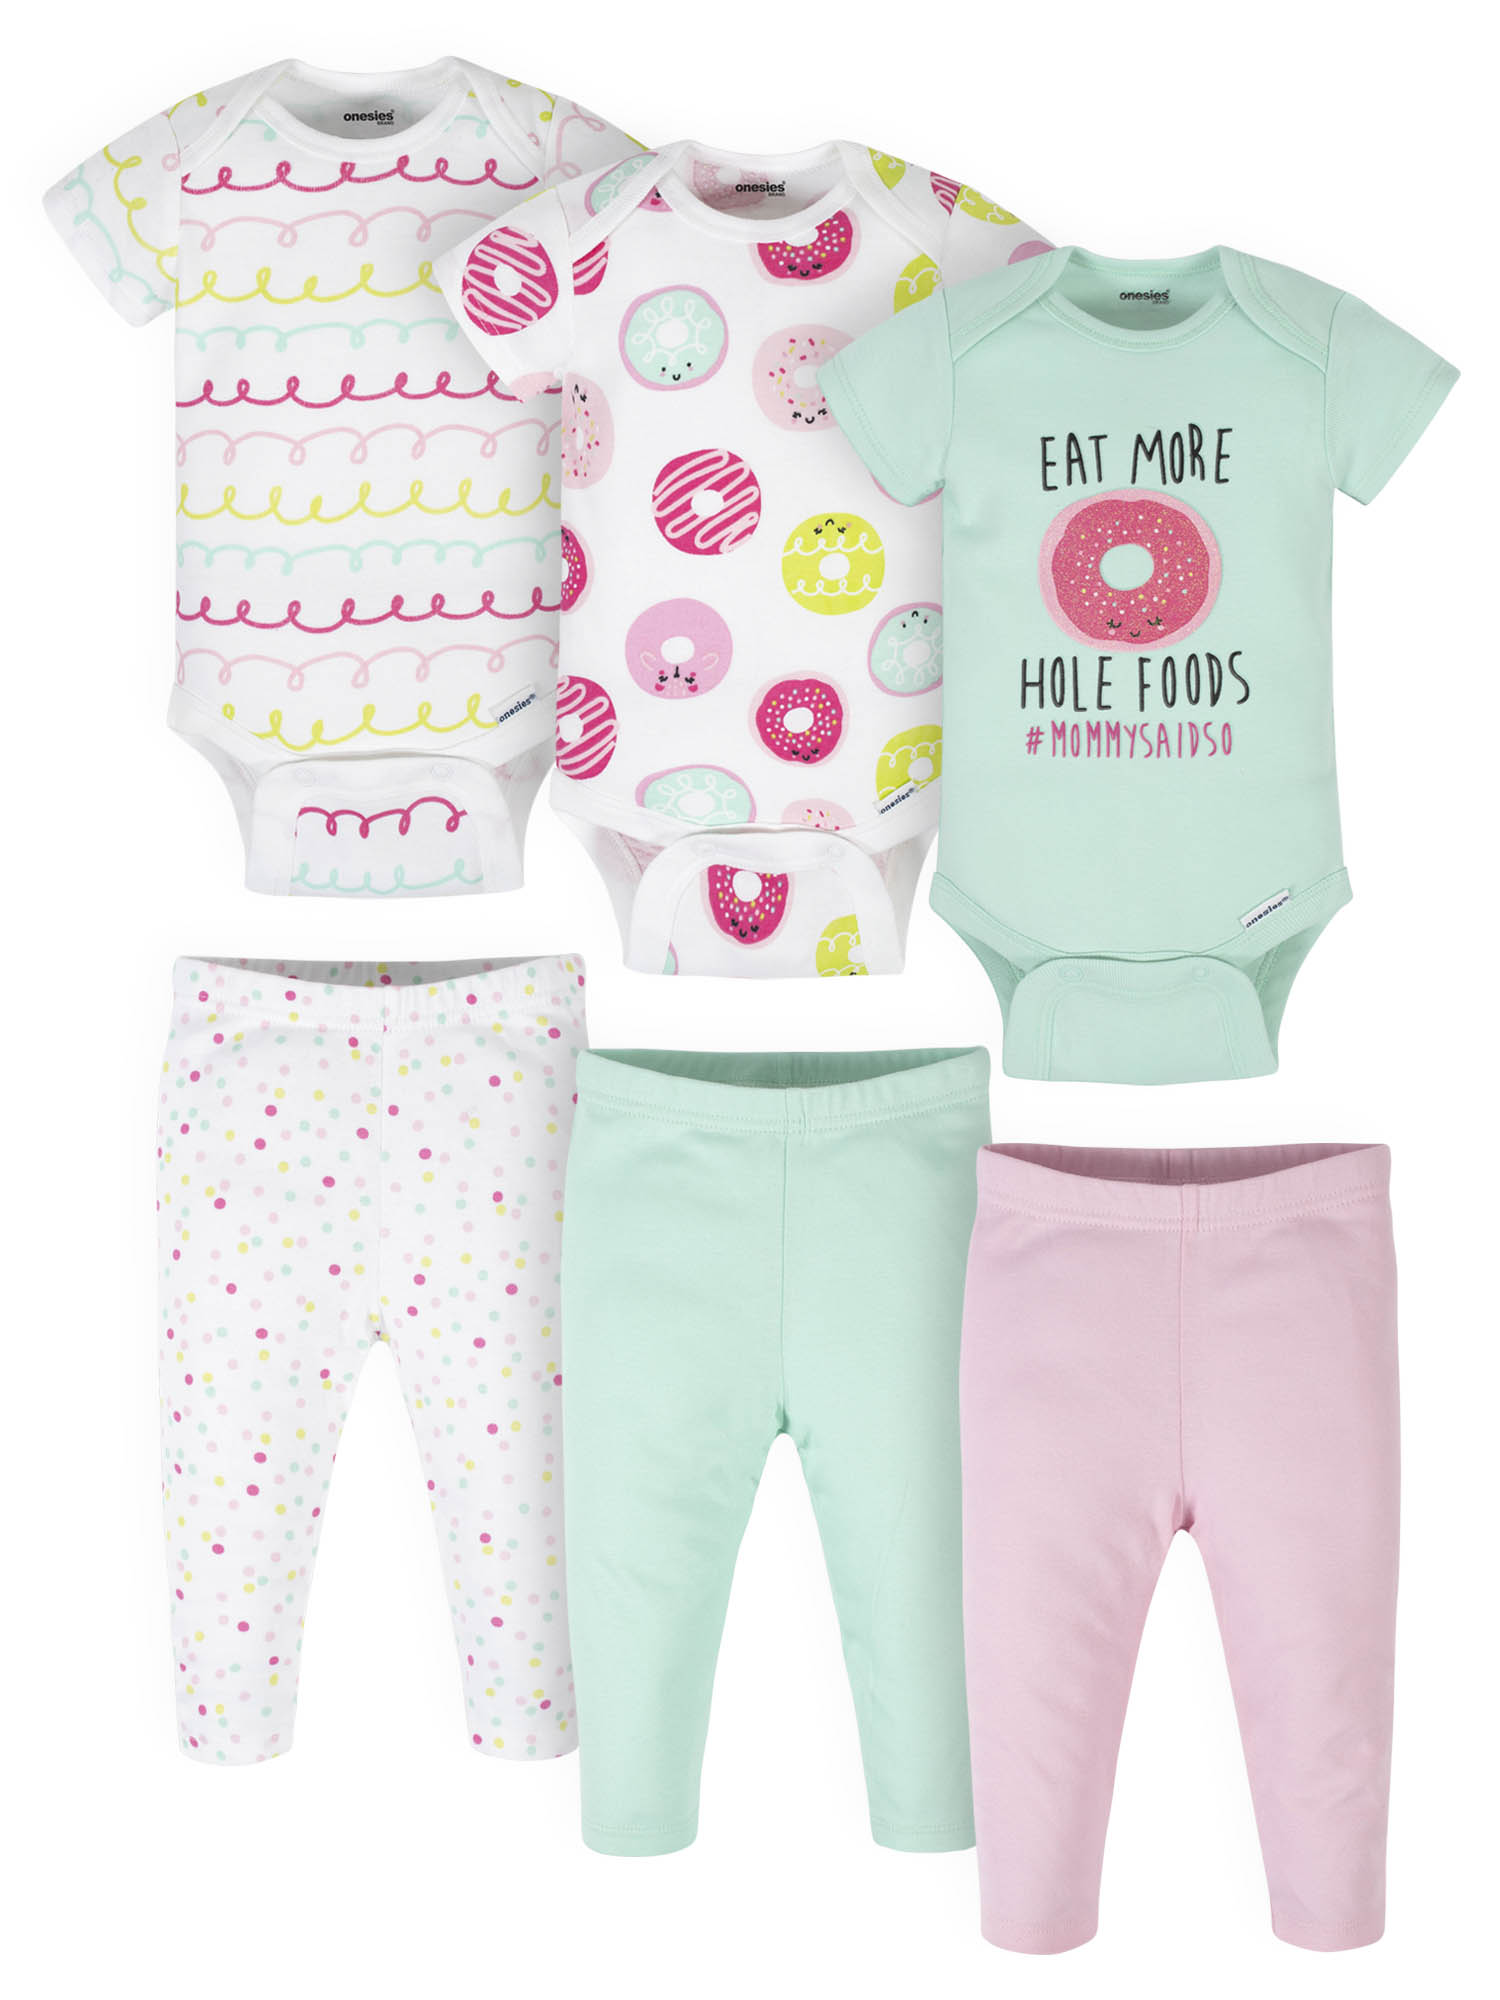 Onesies Brand Baby Girl Bodysuits & Pants, 6-Piece Outfit Set - image 1 of 9